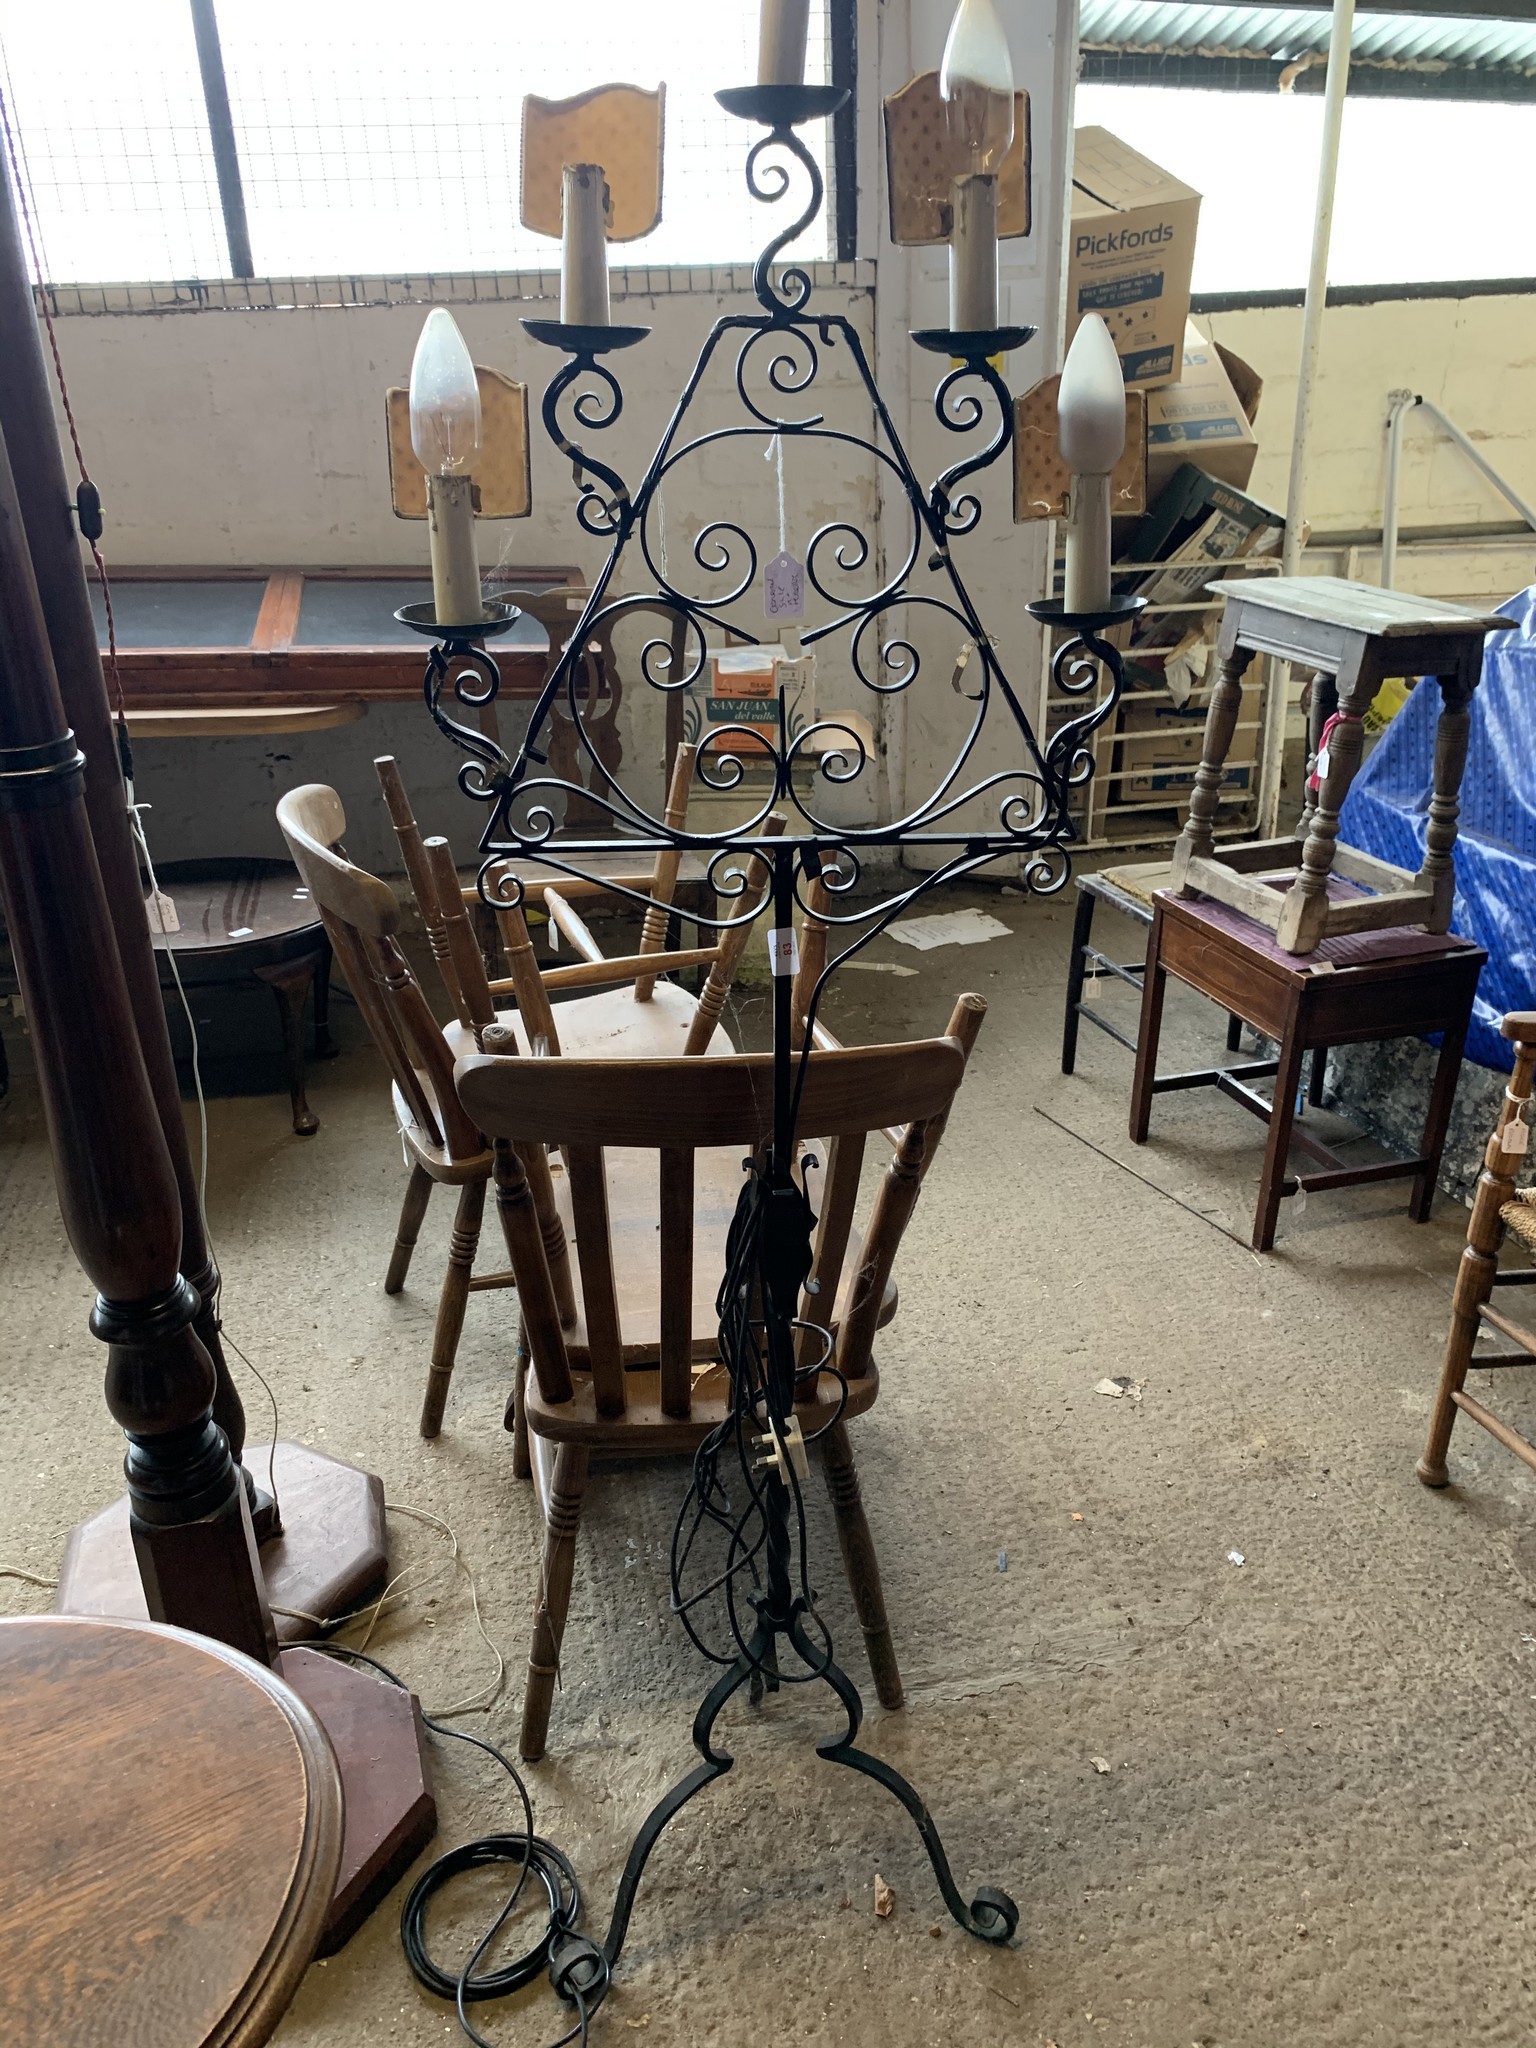 WROUGHT IRON LAMP STAND RAISED ON TRIPOD LEGS WITH FIVE CANDLEHOLDERS, HEIGHT APPROX 56CM